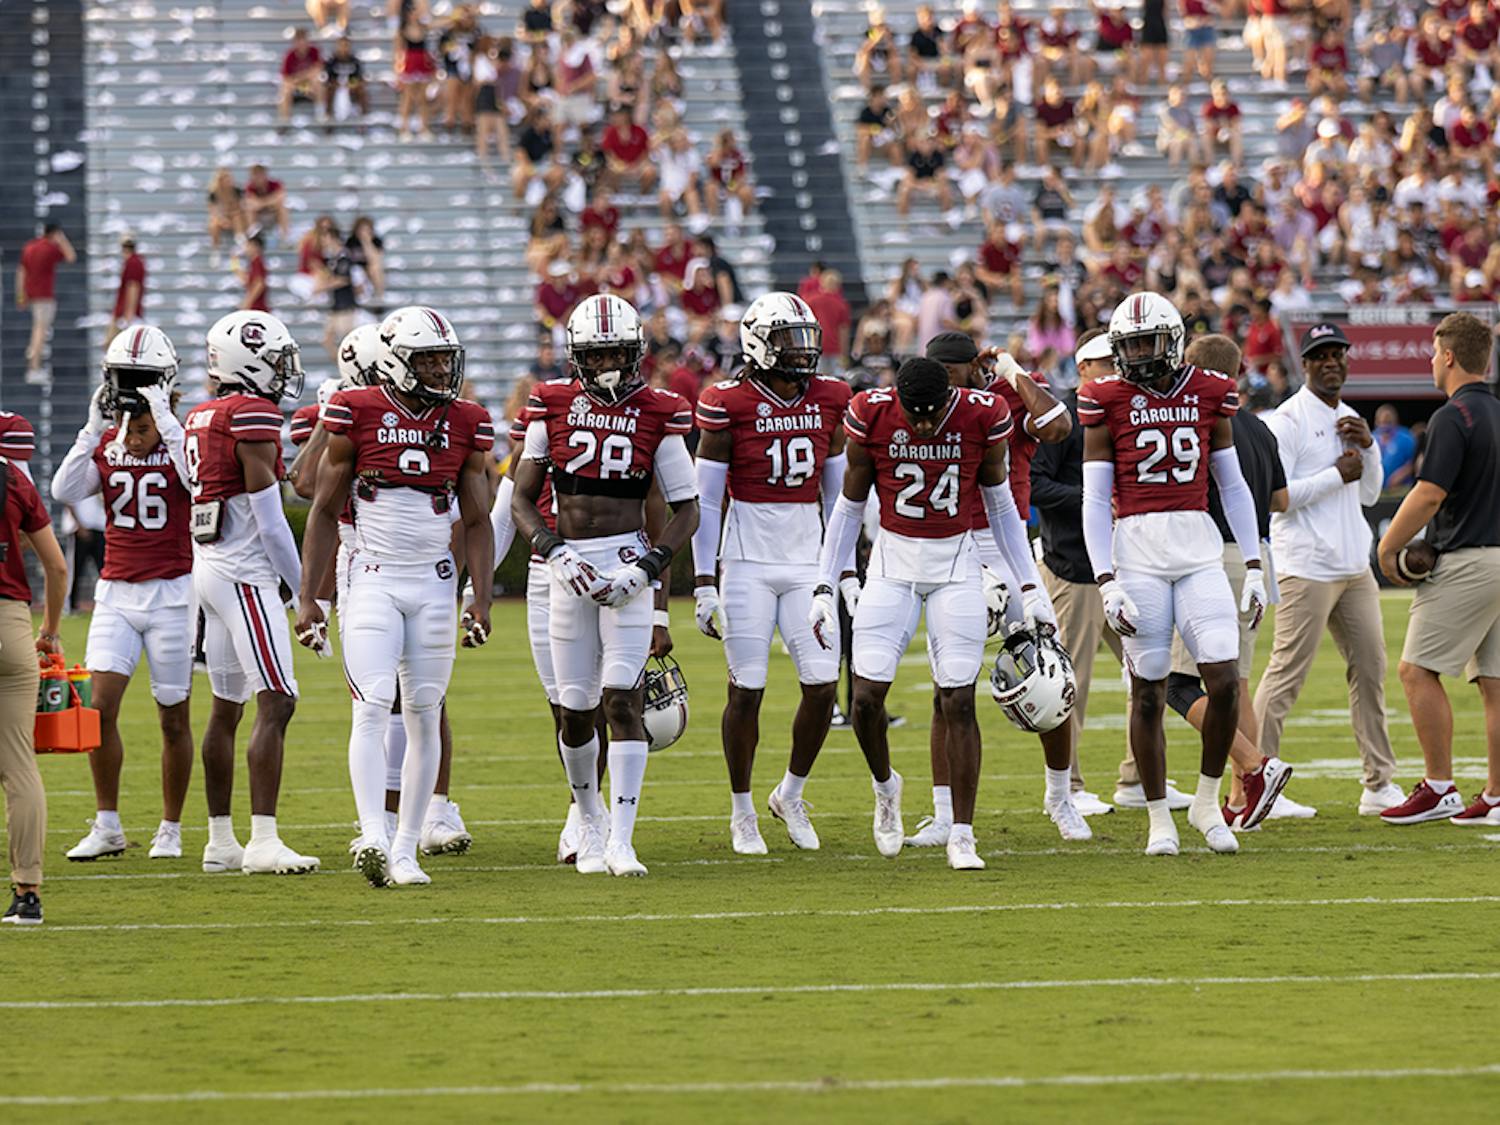 Gamecock football players gear up before facing Eastern Illinois on Saturday, Sept. 4. At the first full capacity game at Williams-Brice Stadium since 2019, the Gamecocks beat the Panthers 46-0.&nbsp;